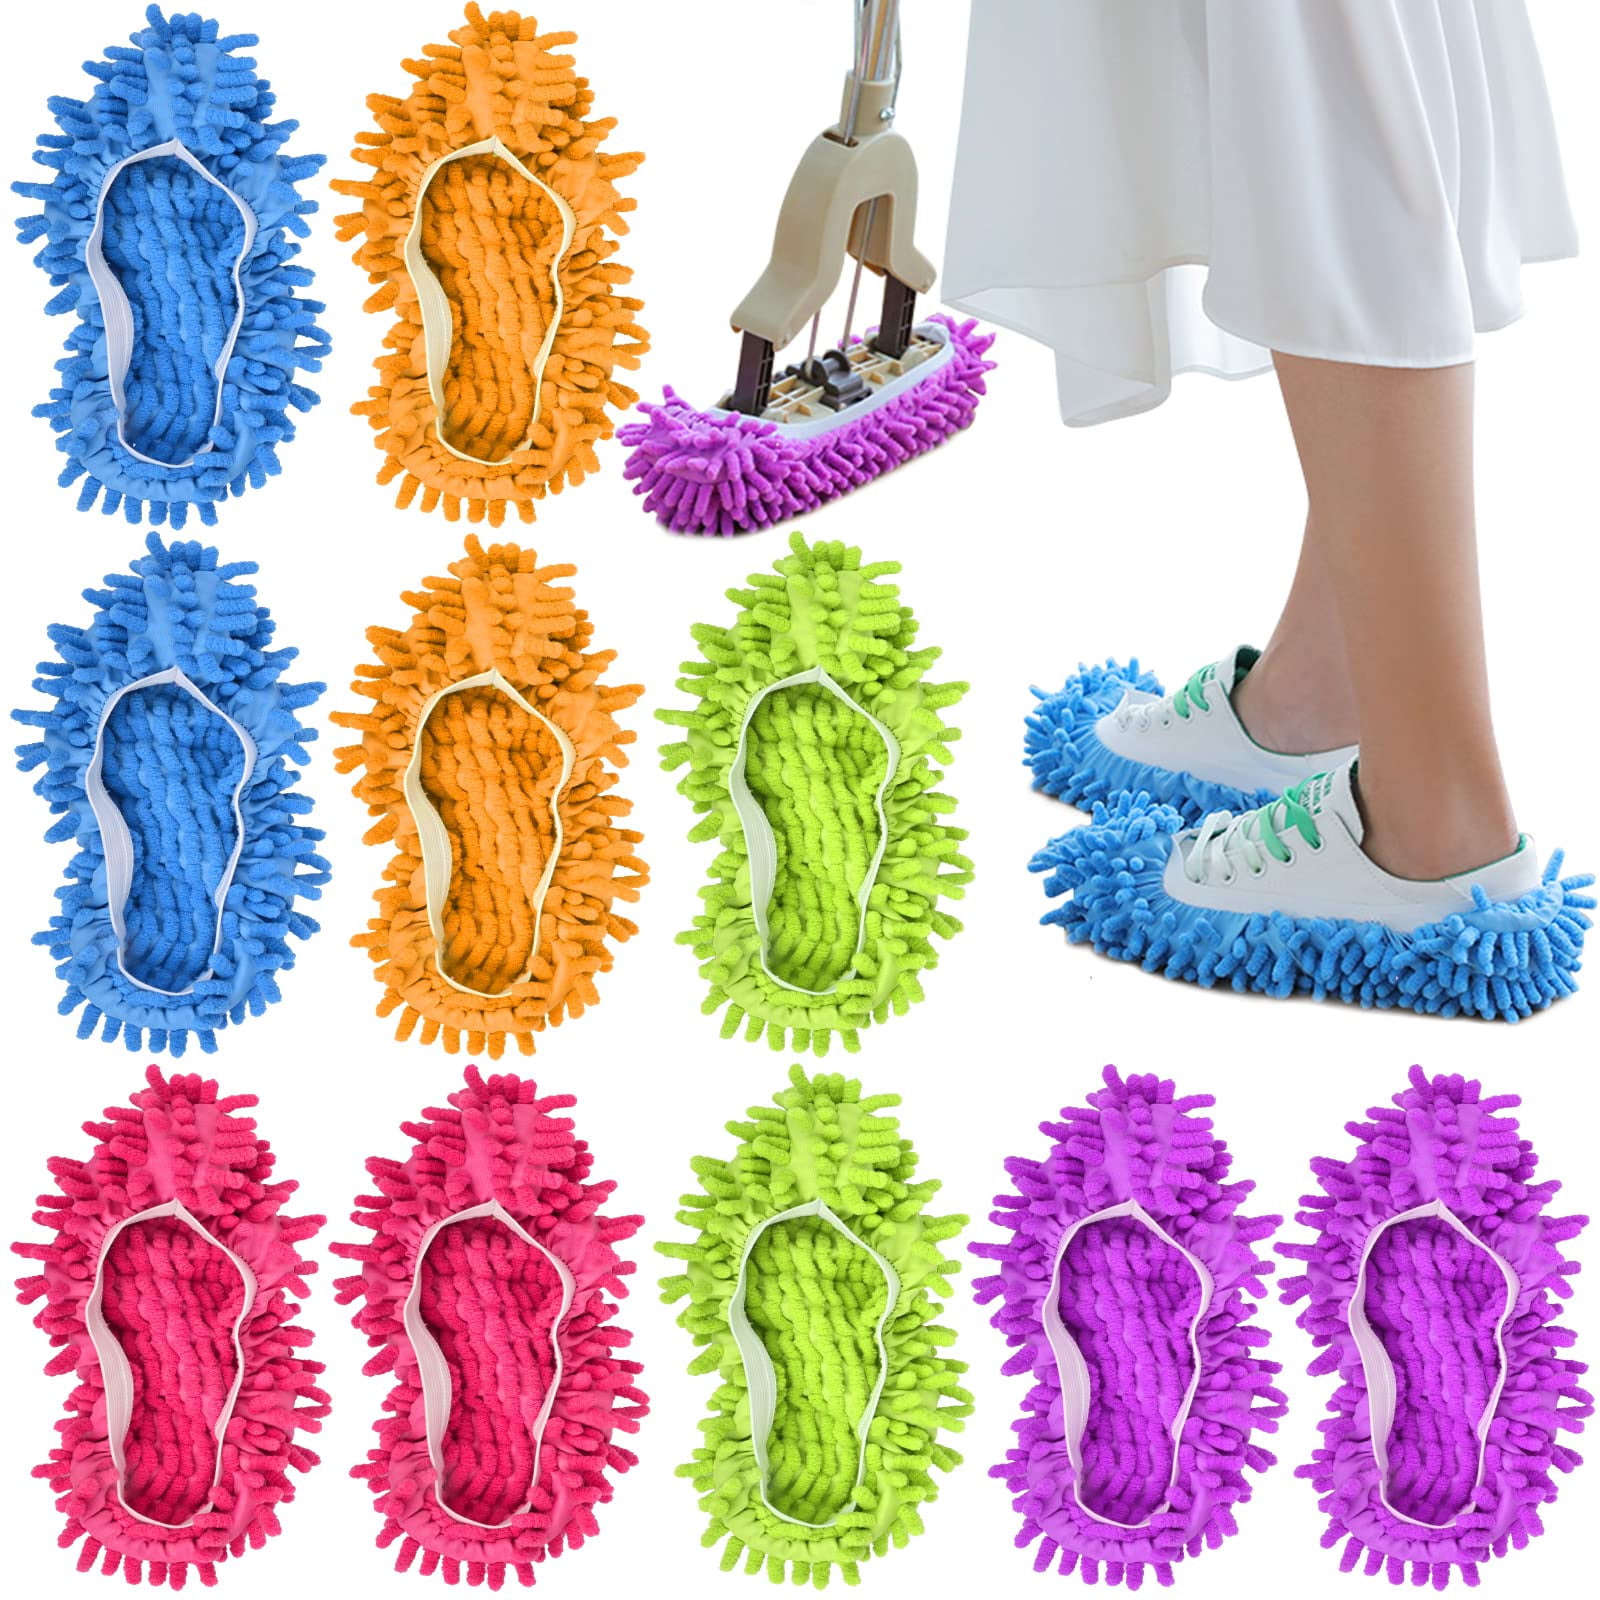 Home Washable Non Slip Floor Dust Cleaning Slippers Shoes Mop House Cleaner 